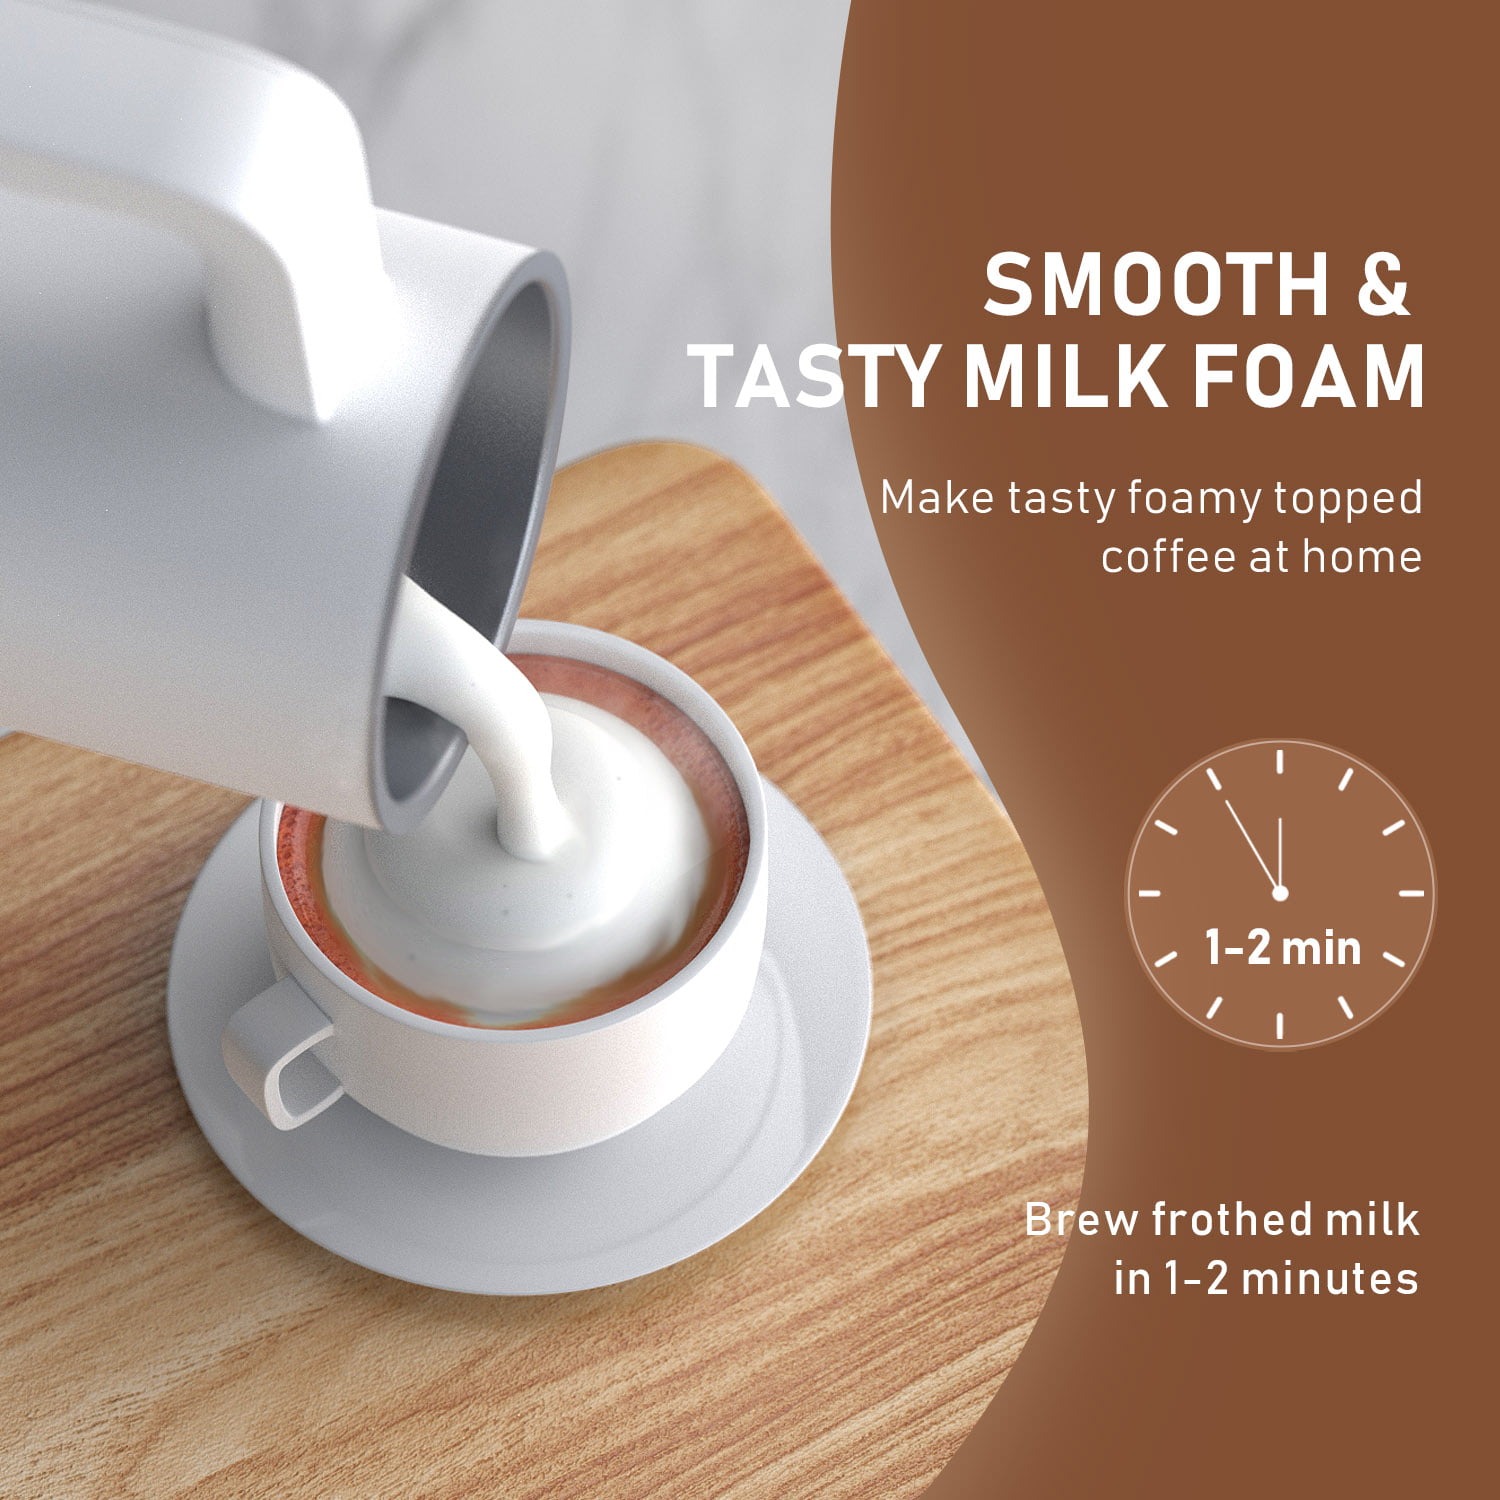 HeyMate Milk Frother, 4-in-1 Electric Milk Frother and Steamer, 24oz/700ml  Detachable Milk Warmer - Dishwasher Safe, Rotation Control Smart Automatic Milk  Steamer for Latte, Cappuccinos, Hot Chocolate